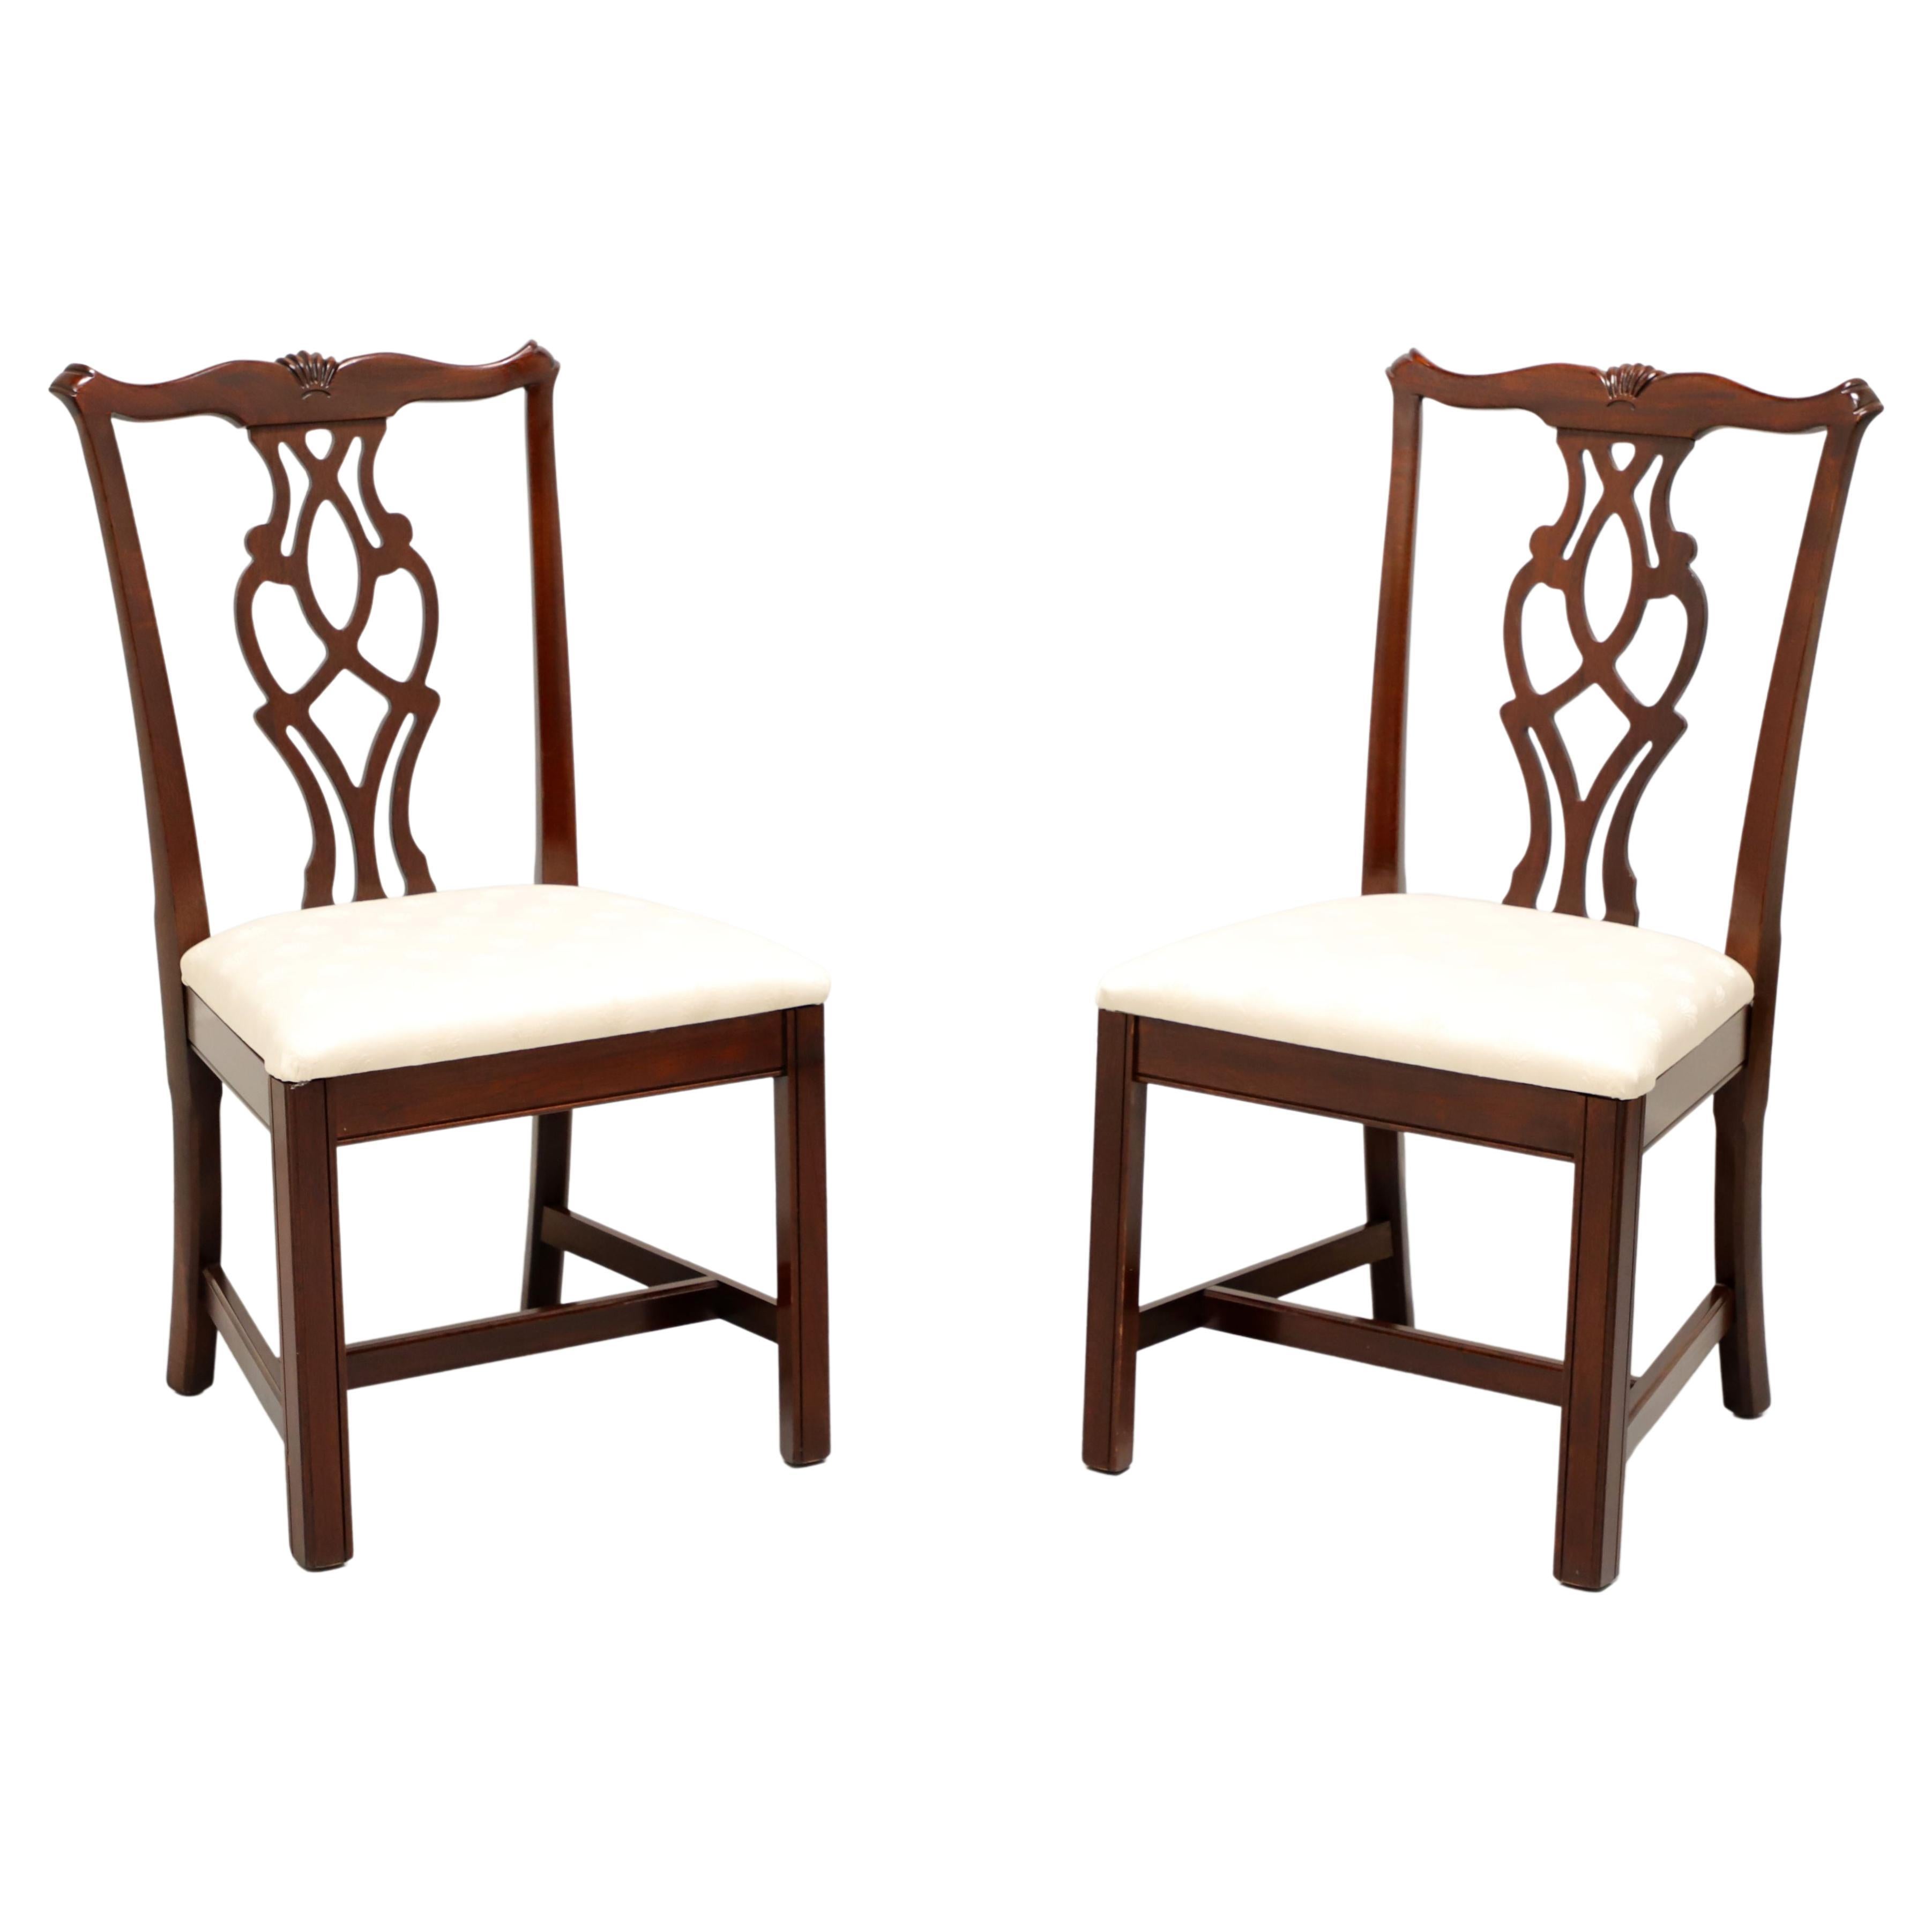 CRESENT Solid Mahogany Straight Leg Chippendale Dining Side Chairs - Pair